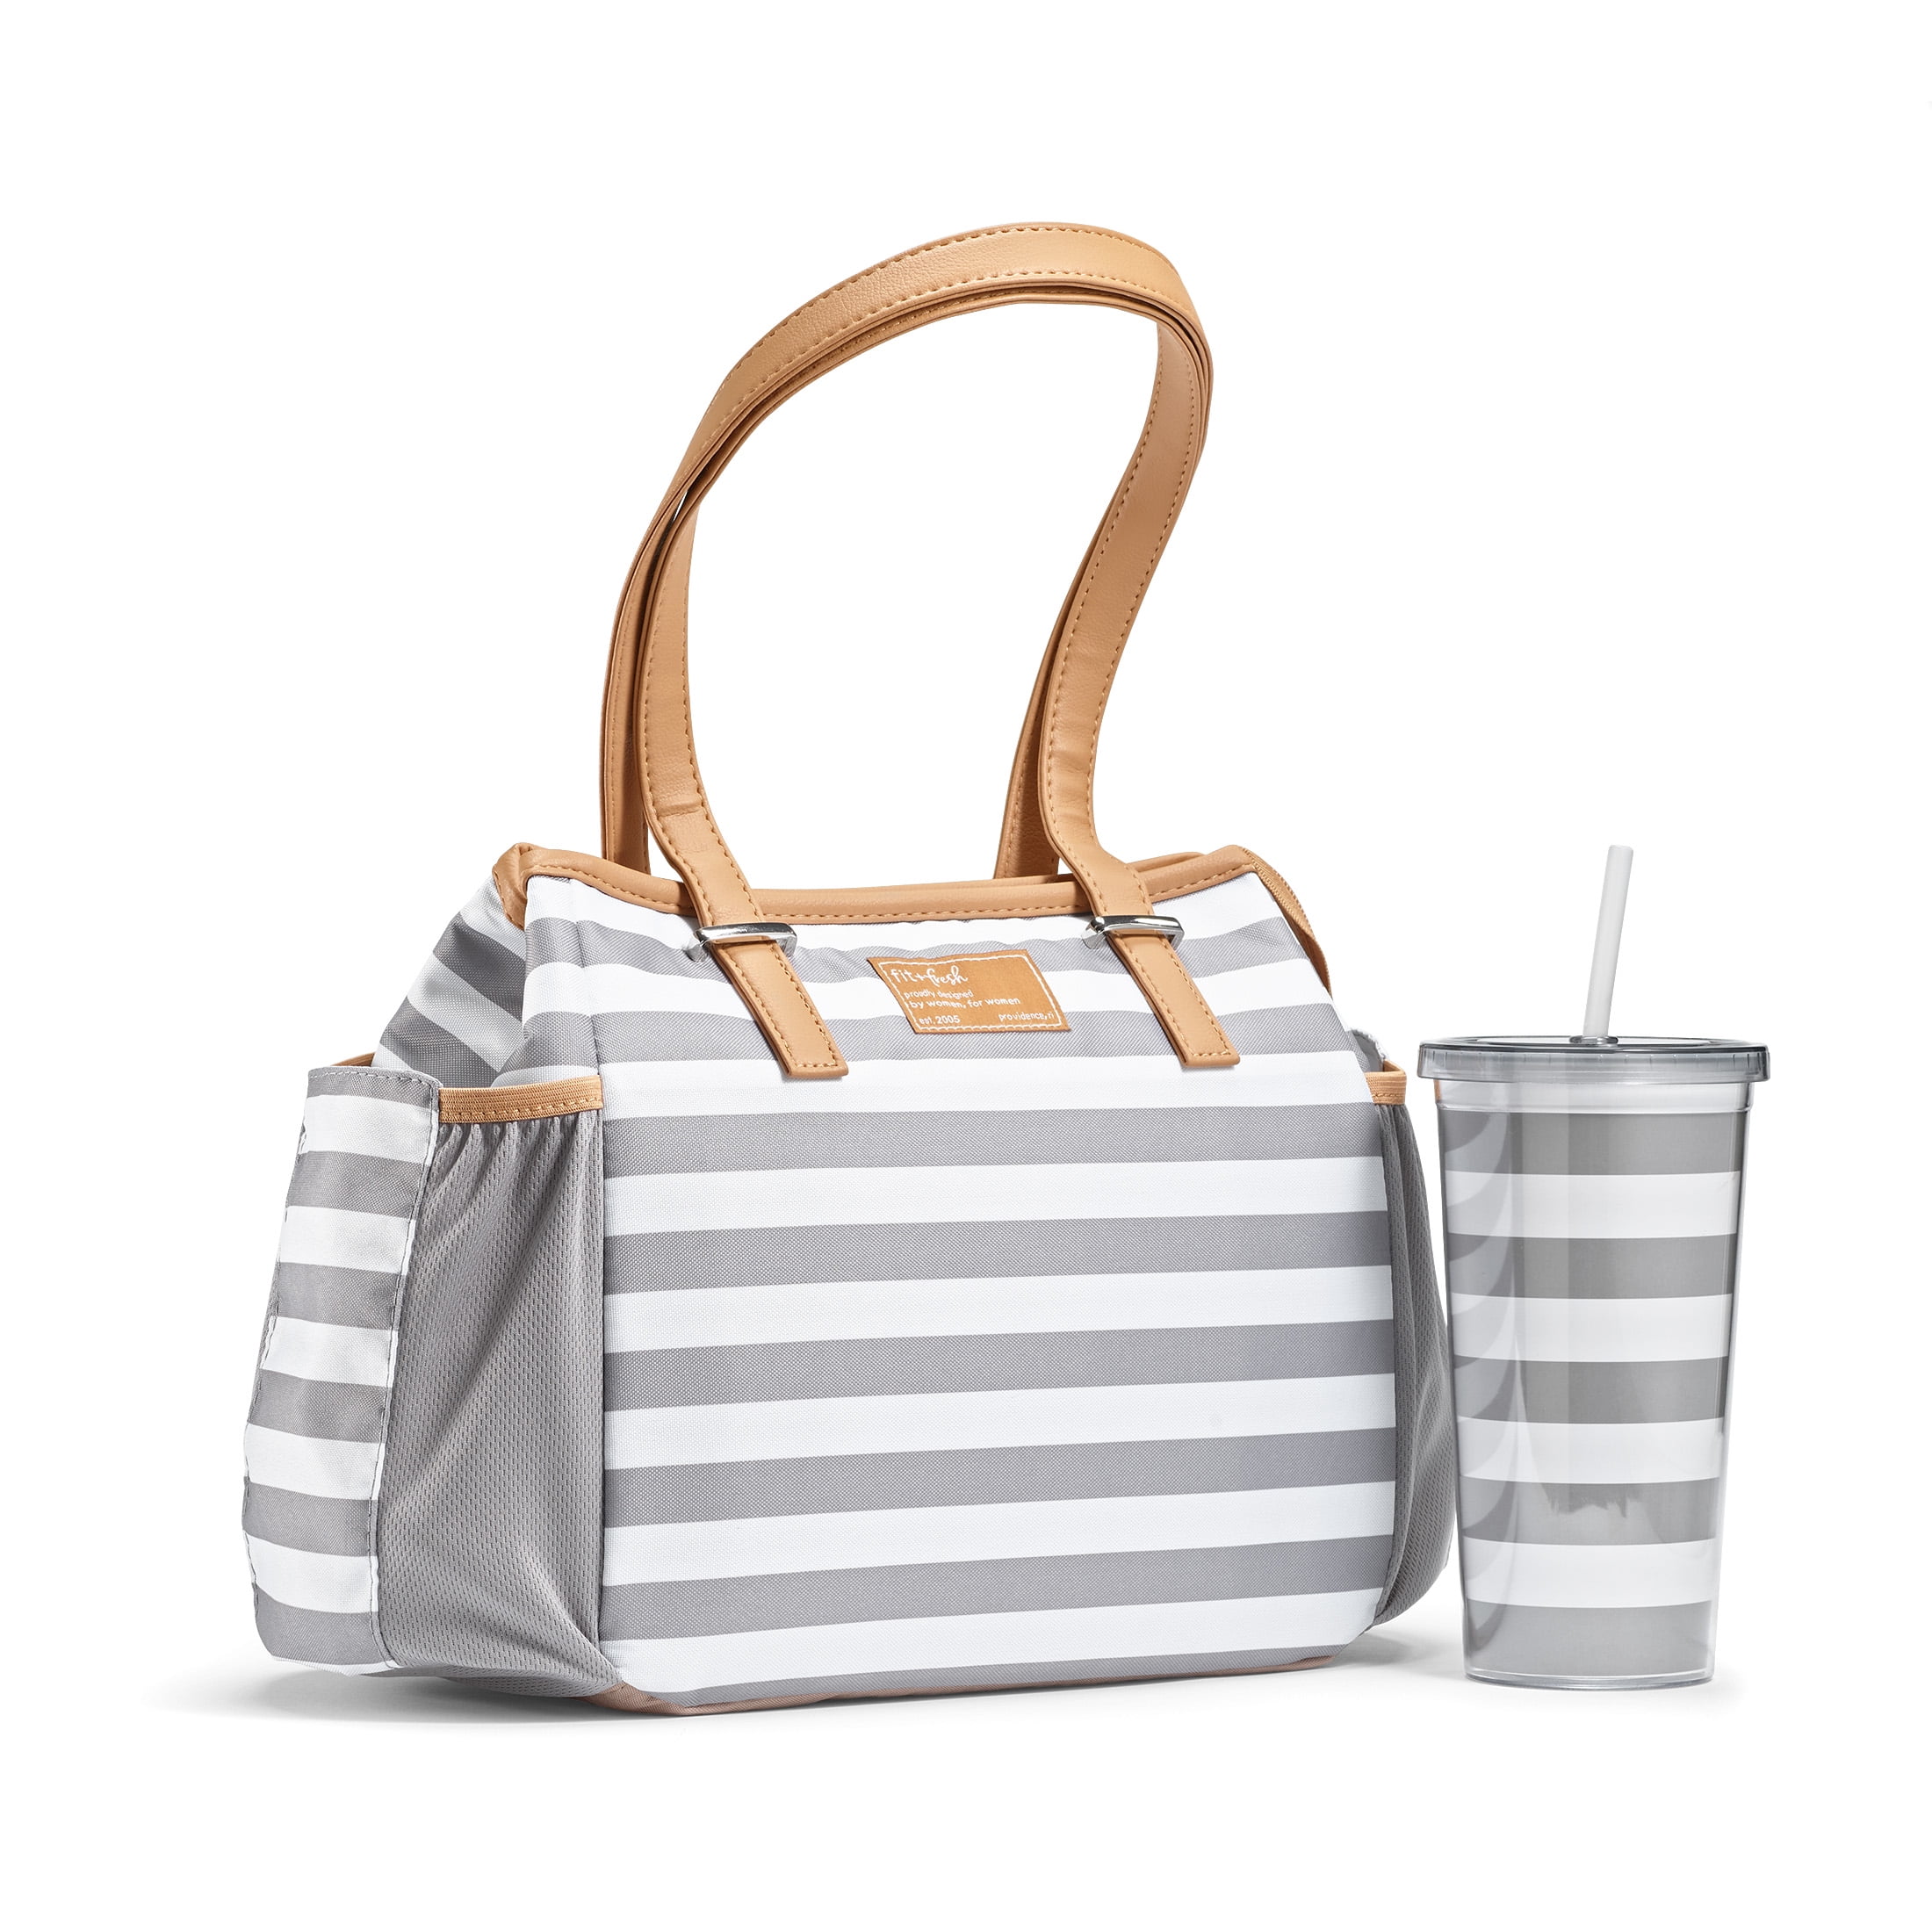 Lunch Bag and Lunch Tote